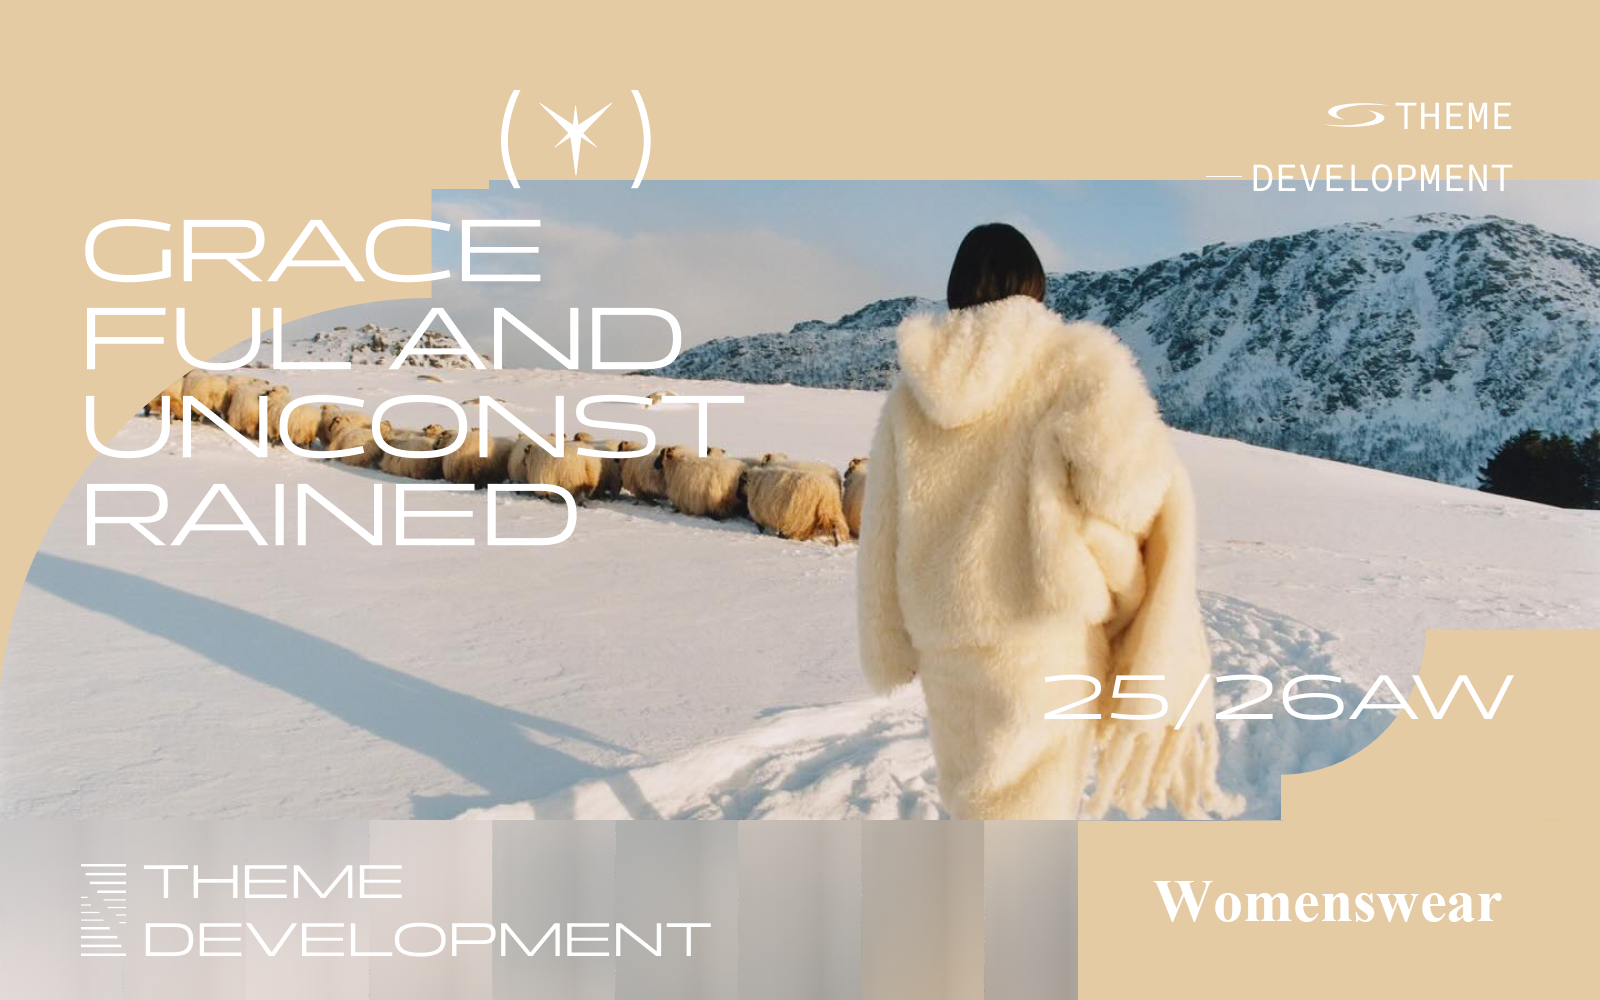 Graceful & Unconstrained -- The Design Development of Women's Fur Clothing